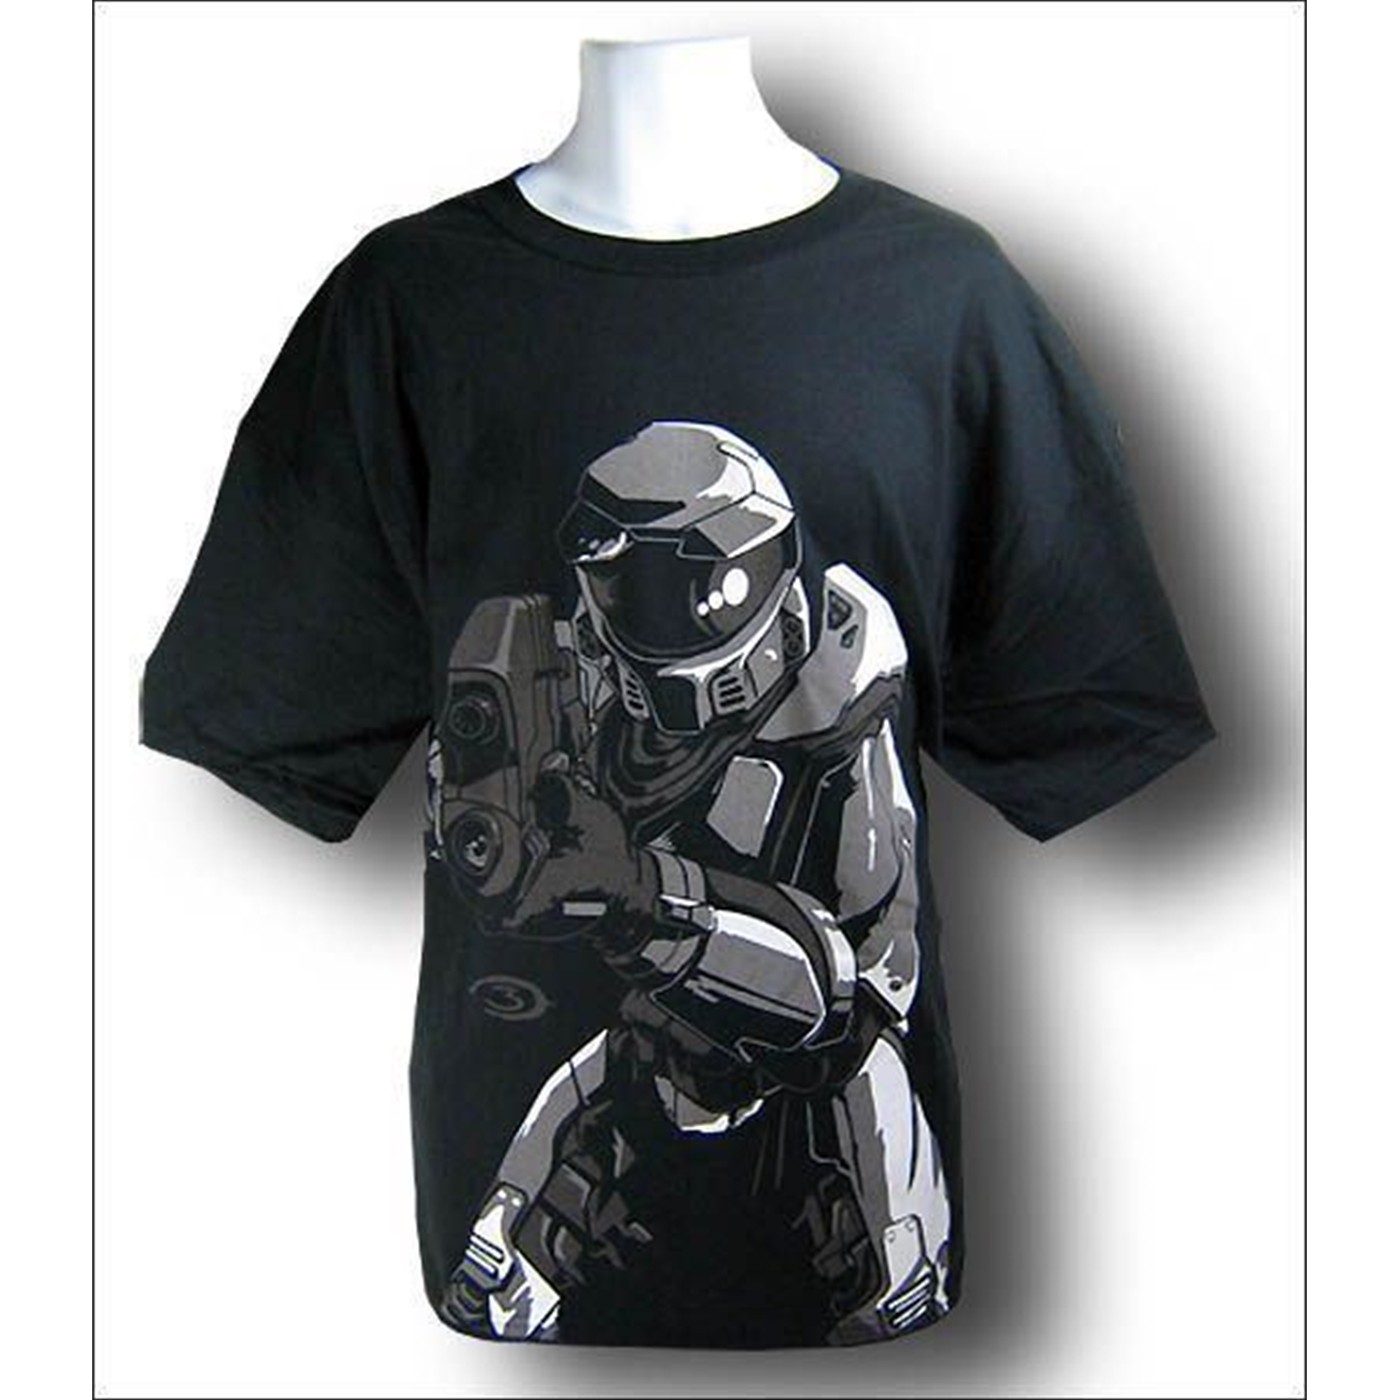 HALO T-Shirt Master Chief Rifle Ready Arms